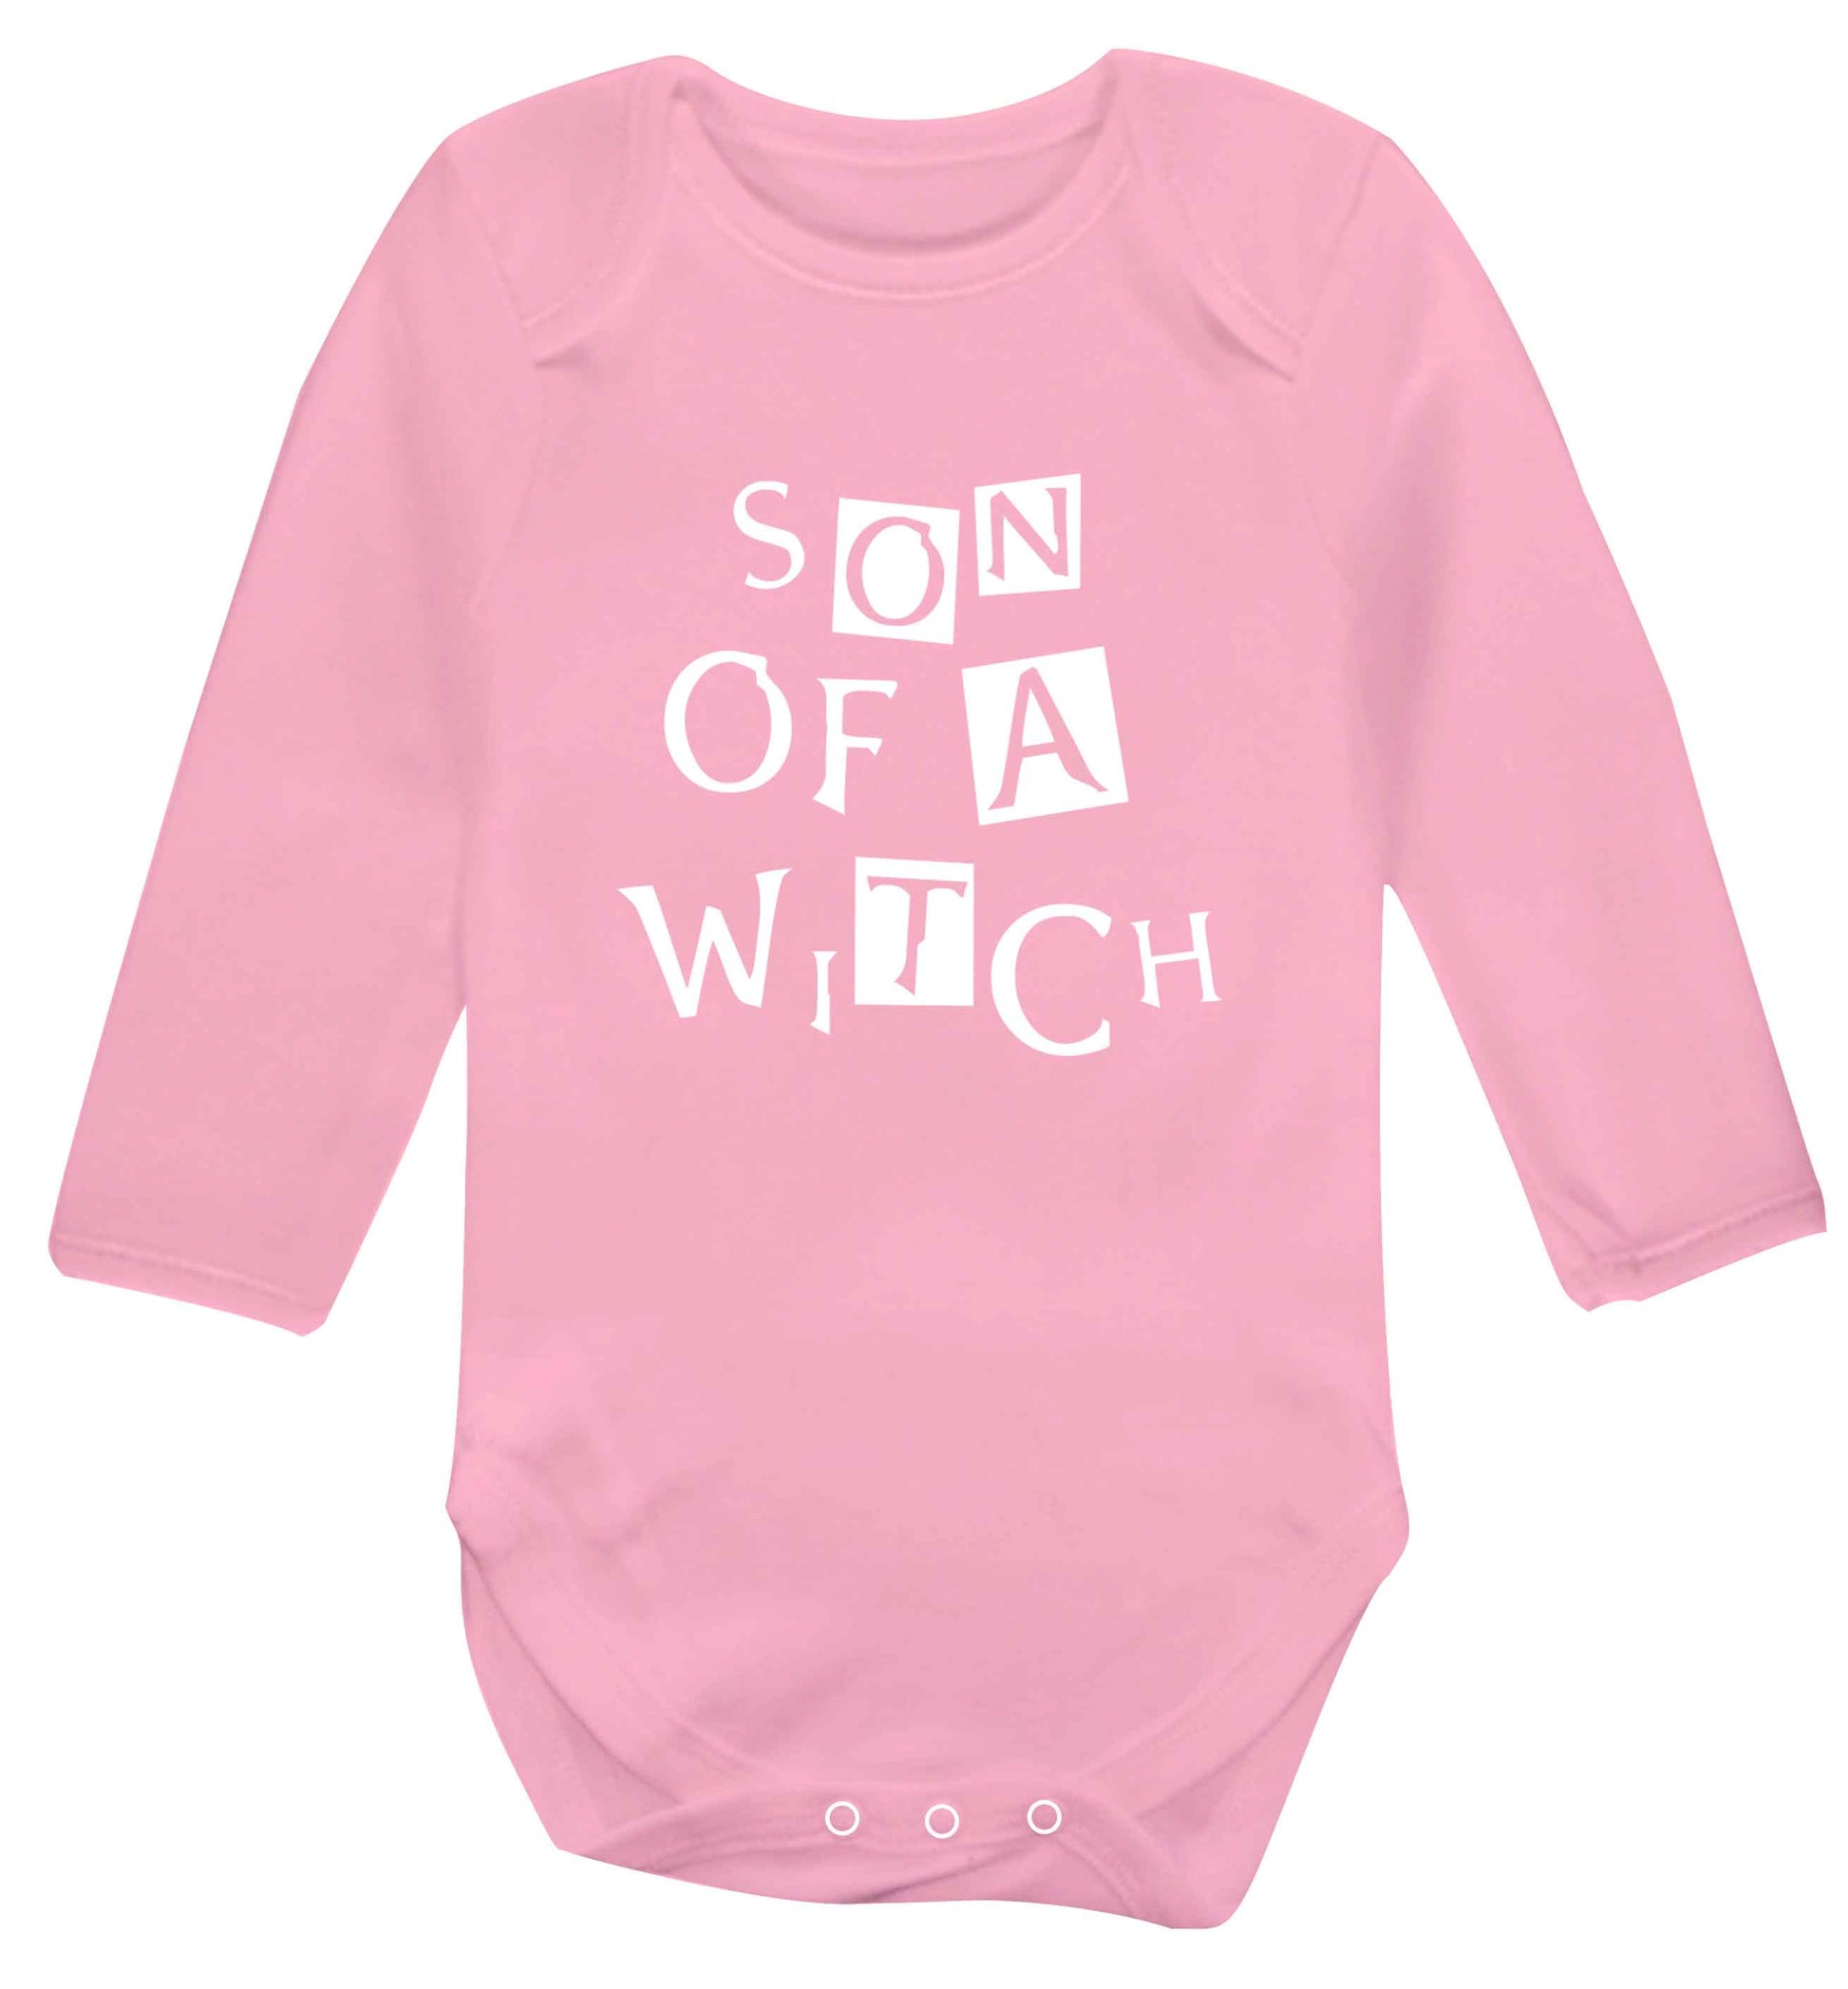 Son of a witch baby vest long sleeved pale pink 6-12 months